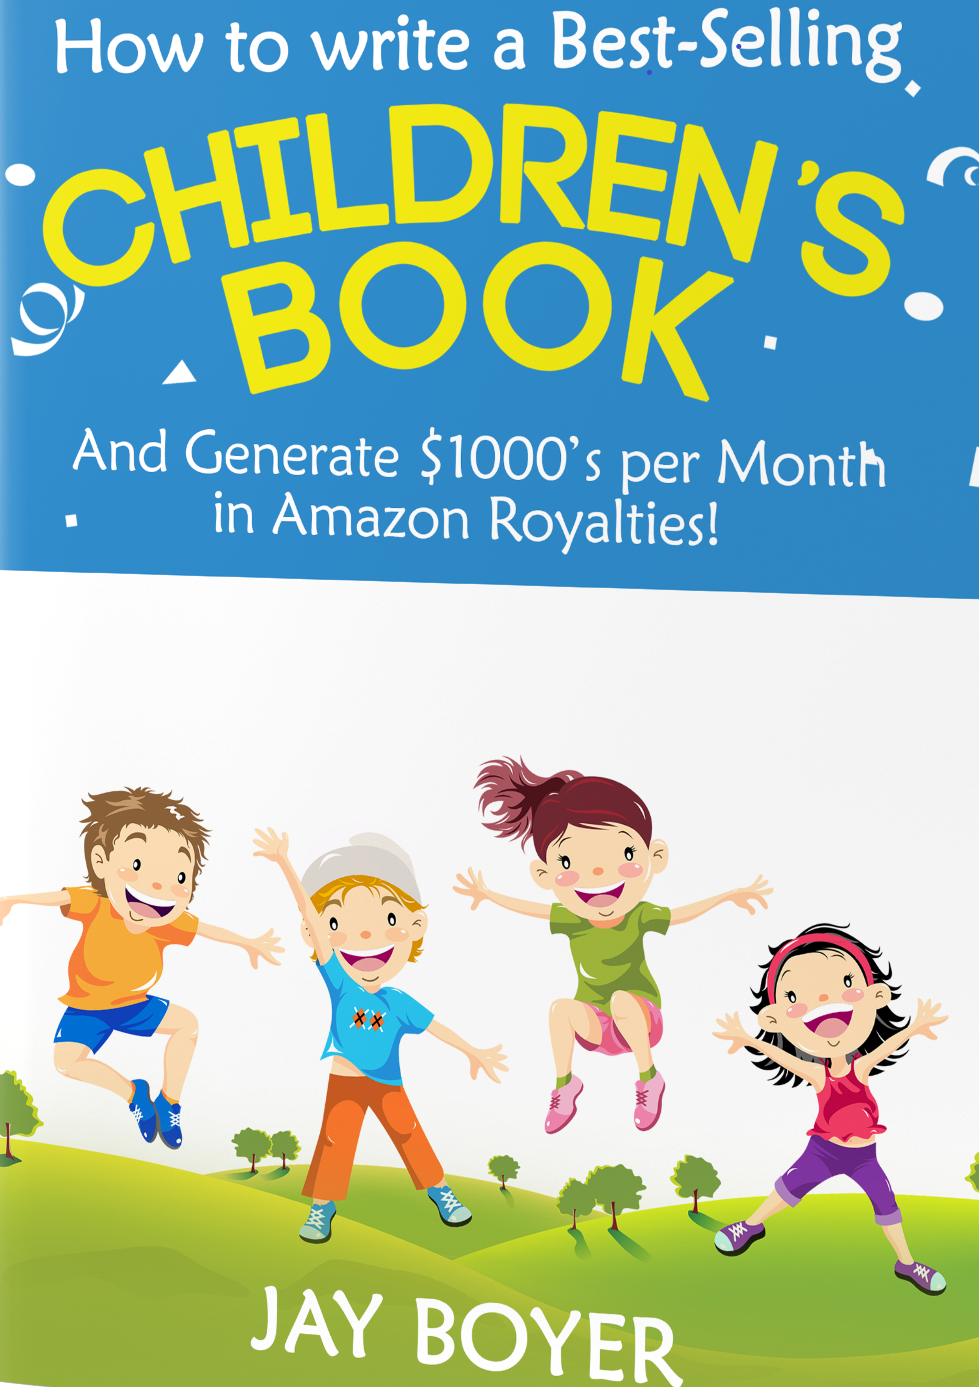 Create The Best Covers For Kids' Books In 2022 & Double Your Amazon Sales